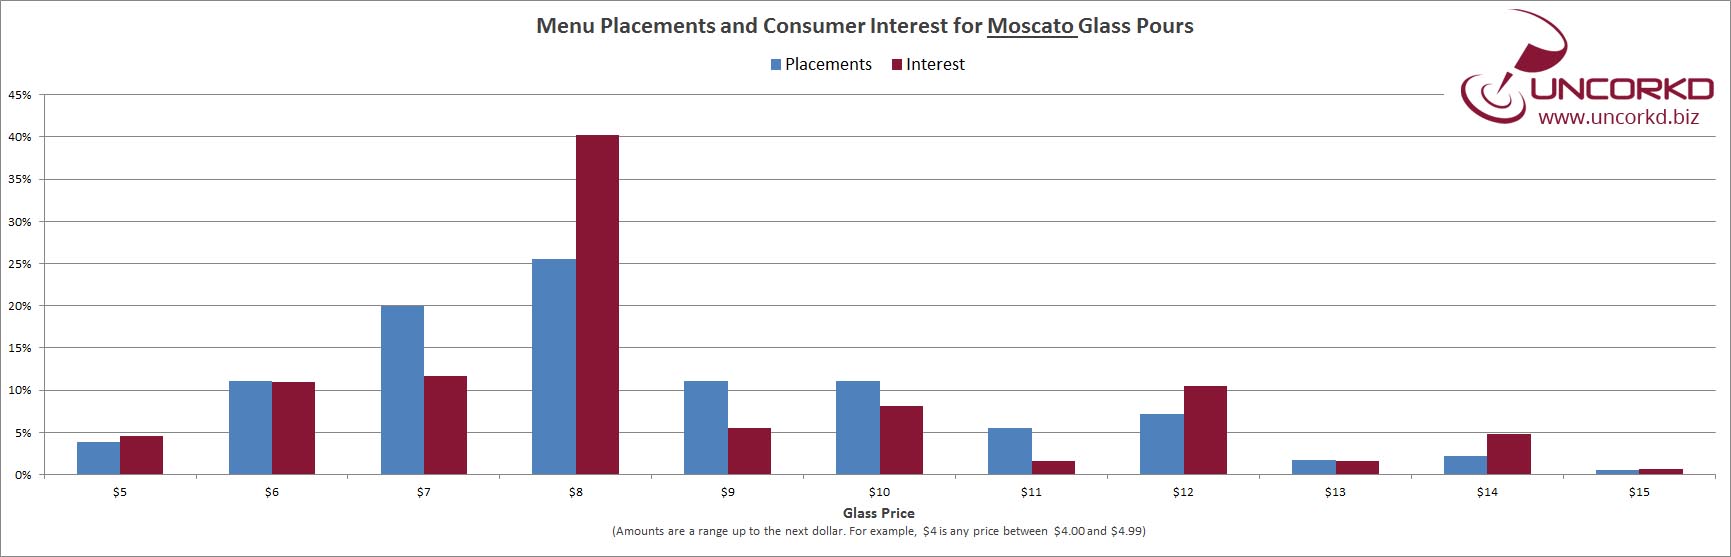 Wine Glass Pricing, Placements and Interest for Moscato